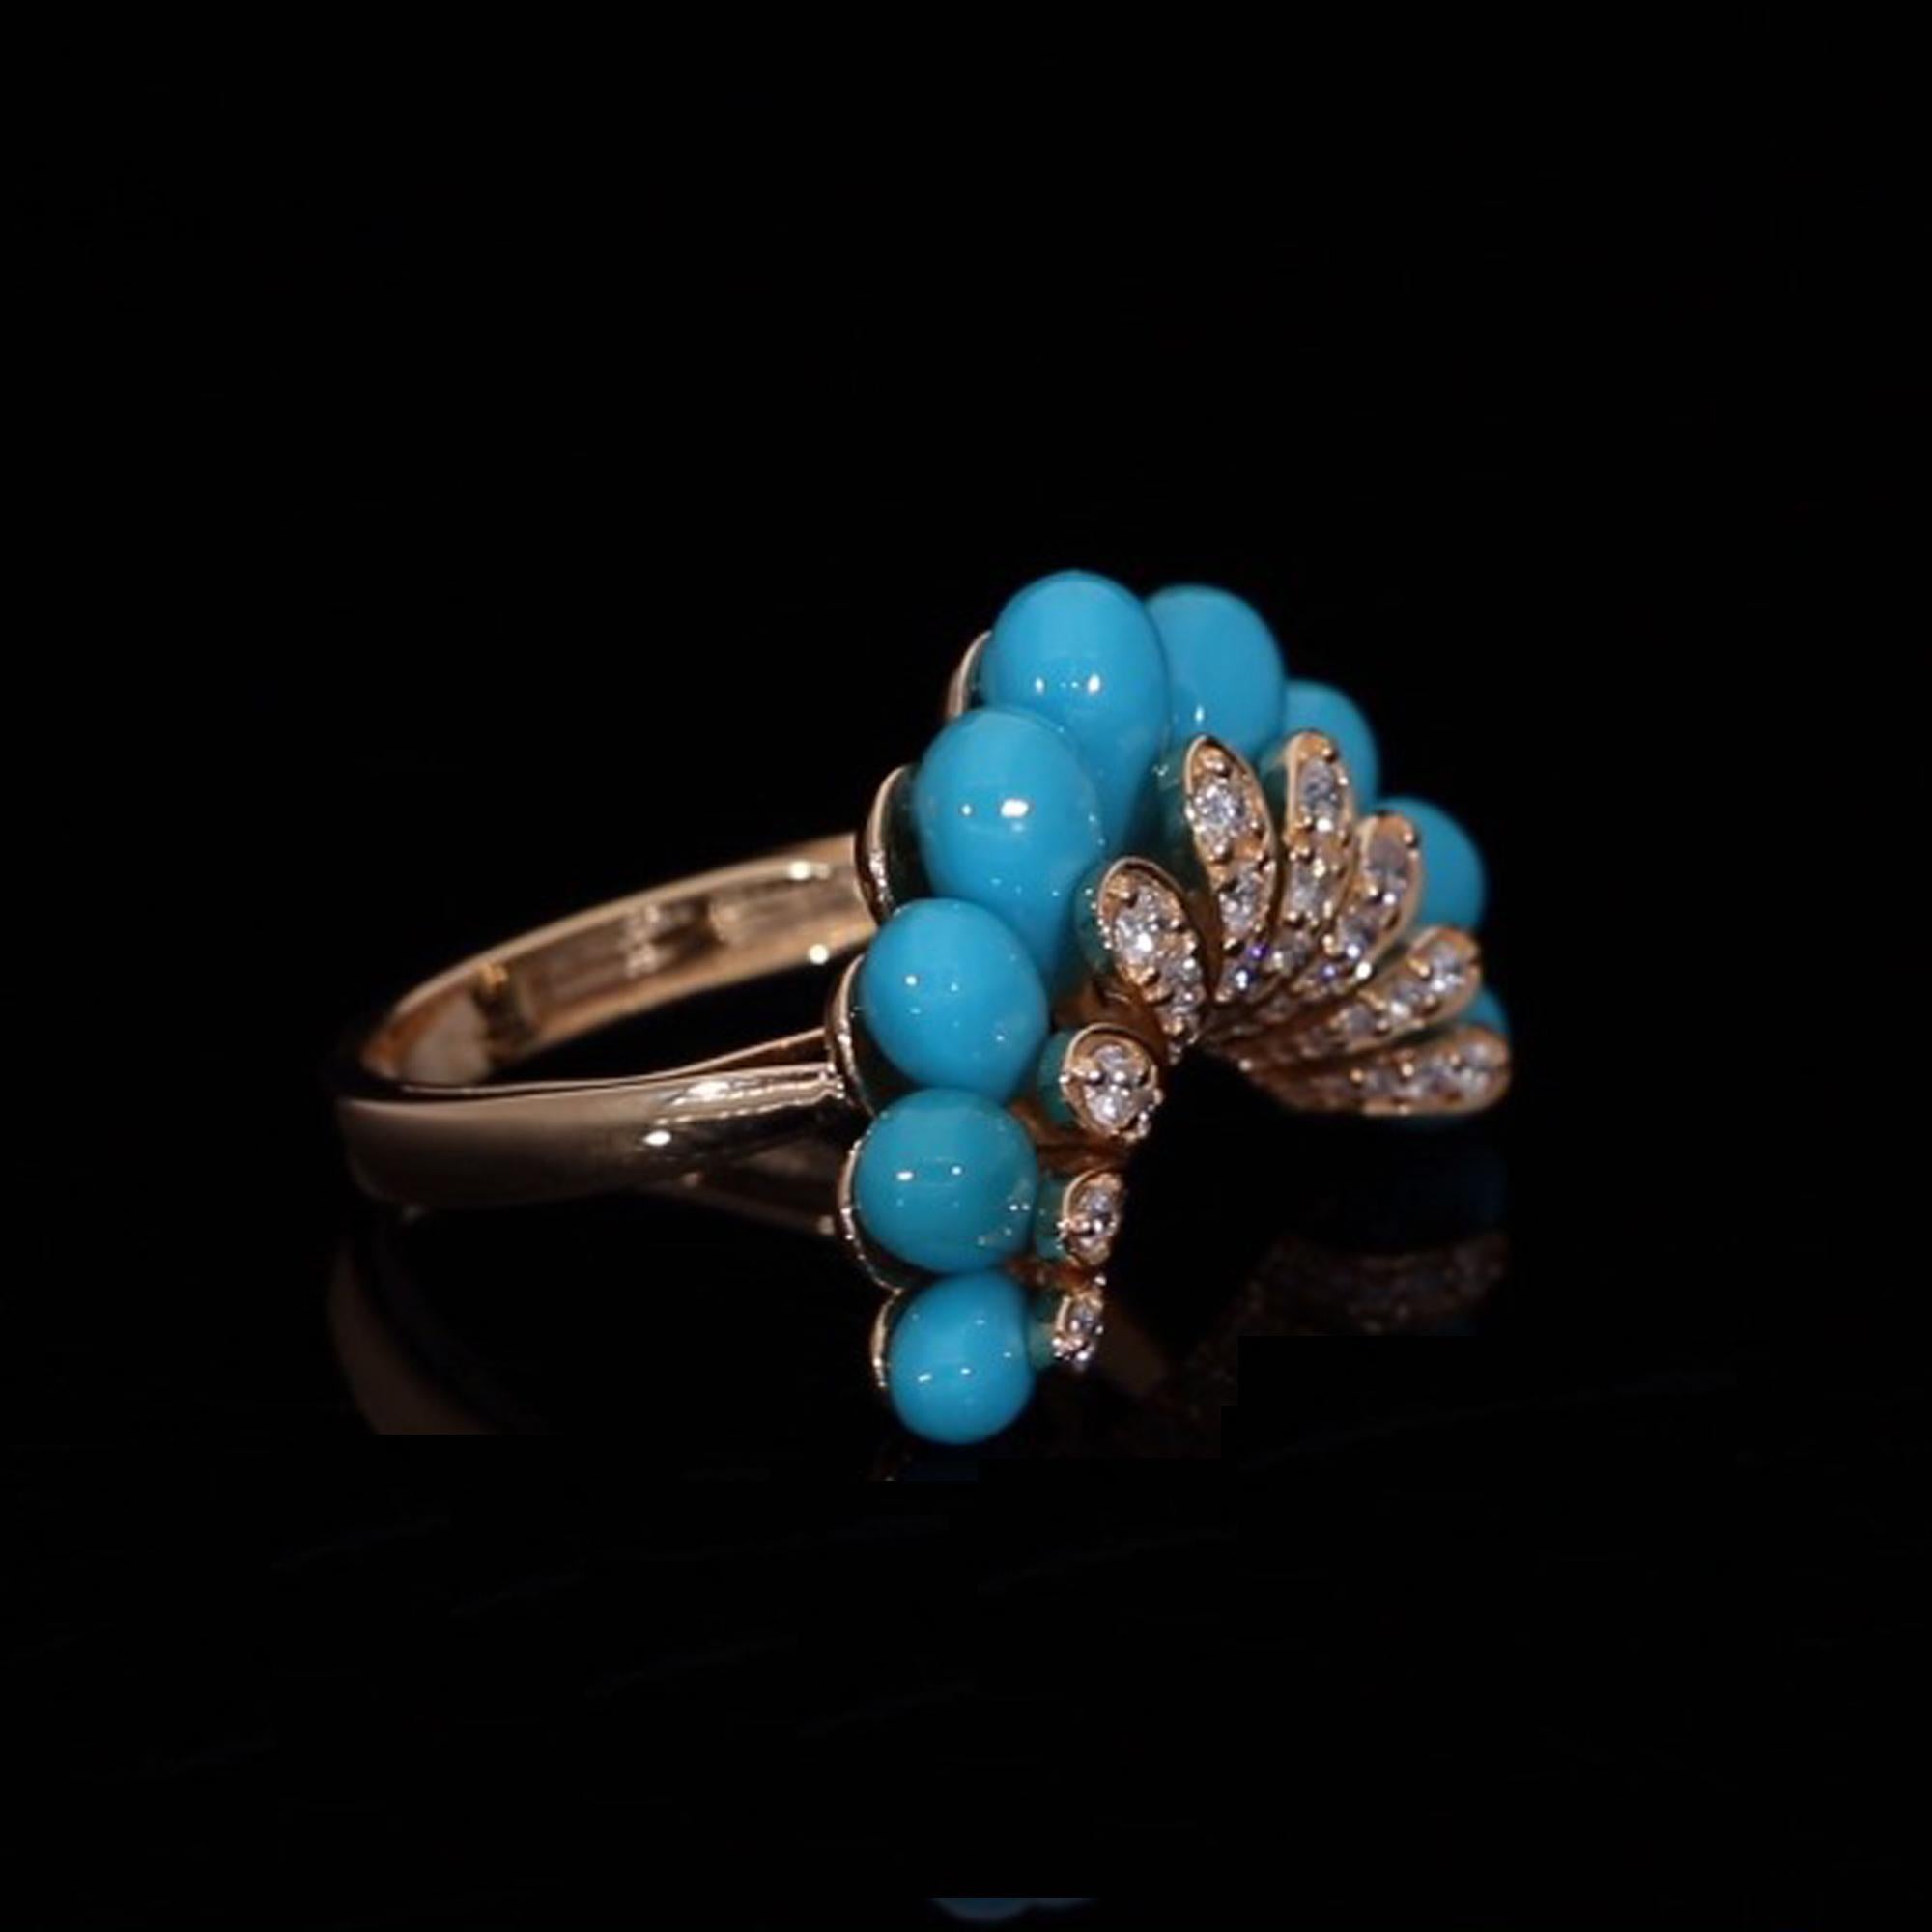 Crafted with precision and attention to detail, the ring is fashioned in luxurious 18 Karat Yellow Gold, adding a warm and radiant glow to the design. The yellow gold setting provides the perfect backdrop for the turquoise and diamonds, creating a